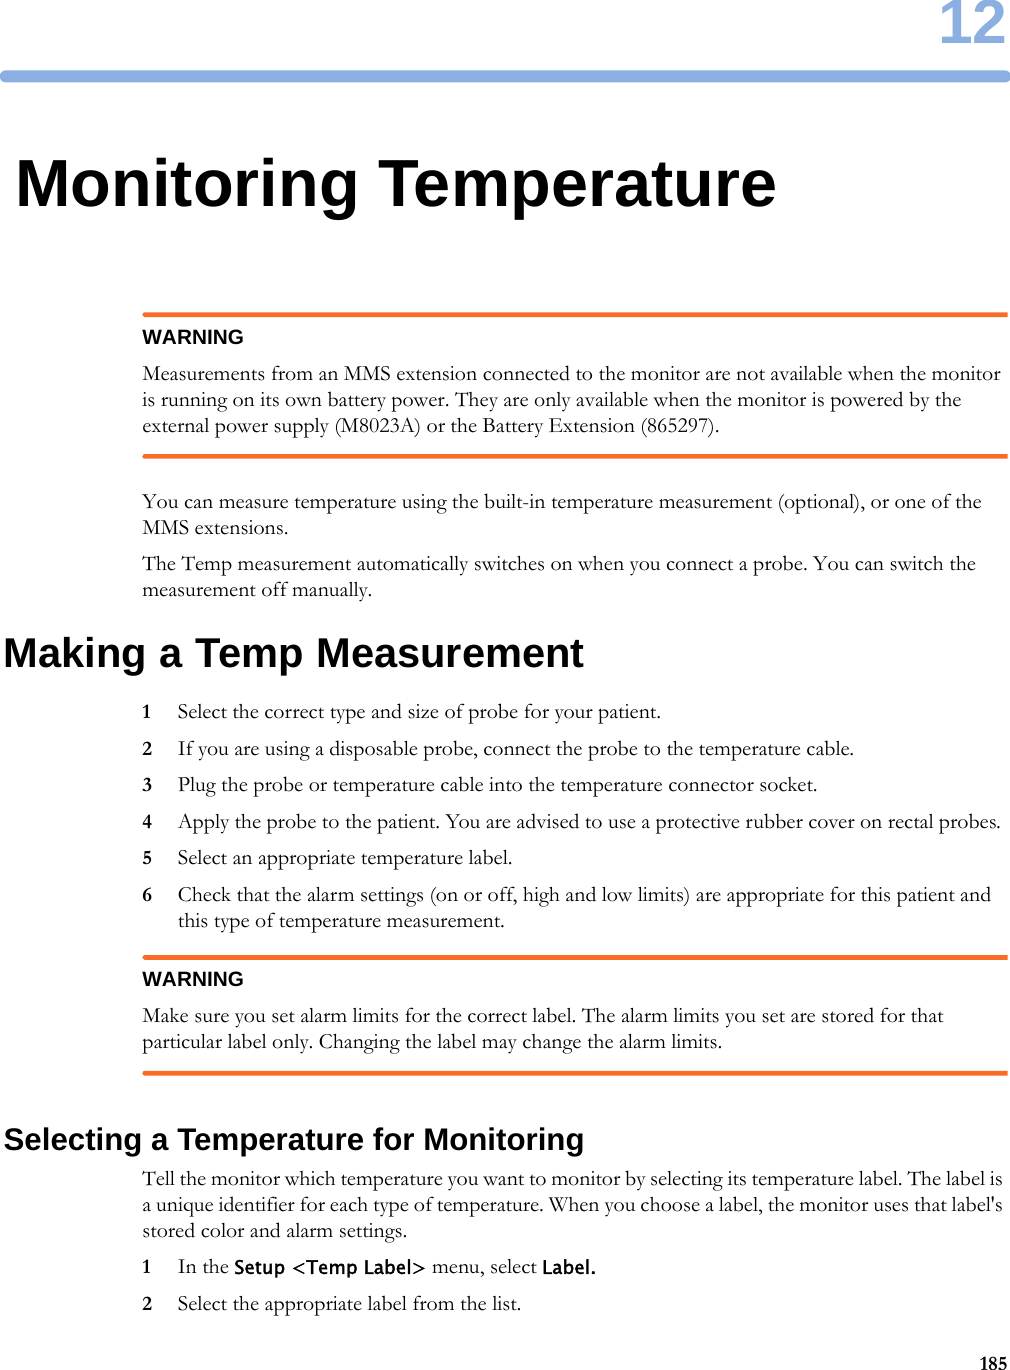 1218512Monitoring TemperatureWARNINGMeasurements from an MMS extension connected to the monitor are not available when the monitor is running on its own battery power. They are only available when the monitor is powered by the external power supply (M8023A) or the Battery Extension (865297).You can measure temperature using the built-in temperature measurement (optional), or one of the MMS extensions.The Temp measurement automatically switches on when you connect a probe. You can switch the measurement off manually.Making a Temp Measurement1Select the correct type and size of probe for your patient.2If you are using a disposable probe, connect the probe to the temperature cable.3Plug the probe or temperature cable into the temperature connector socket.4Apply the probe to the patient. You are advised to use a protective rubber cover on rectal probes.5Select an appropriate temperature label.6Check that the alarm settings (on or off, high and low limits) are appropriate for this patient and this type of temperature measurement.WARNINGMake sure you set alarm limits for the correct label. The alarm limits you set are stored for that particular label only. Changing the label may change the alarm limits.Selecting a Temperature for MonitoringTell the monitor which temperature you want to monitor by selecting its temperature label. The label is a unique identifier for each type of temperature. When you choose a label, the monitor uses that label&apos;s stored color and alarm settings.1In the Setup &lt;Temp Label&gt; menu, select Label.2Select the appropriate label from the list.